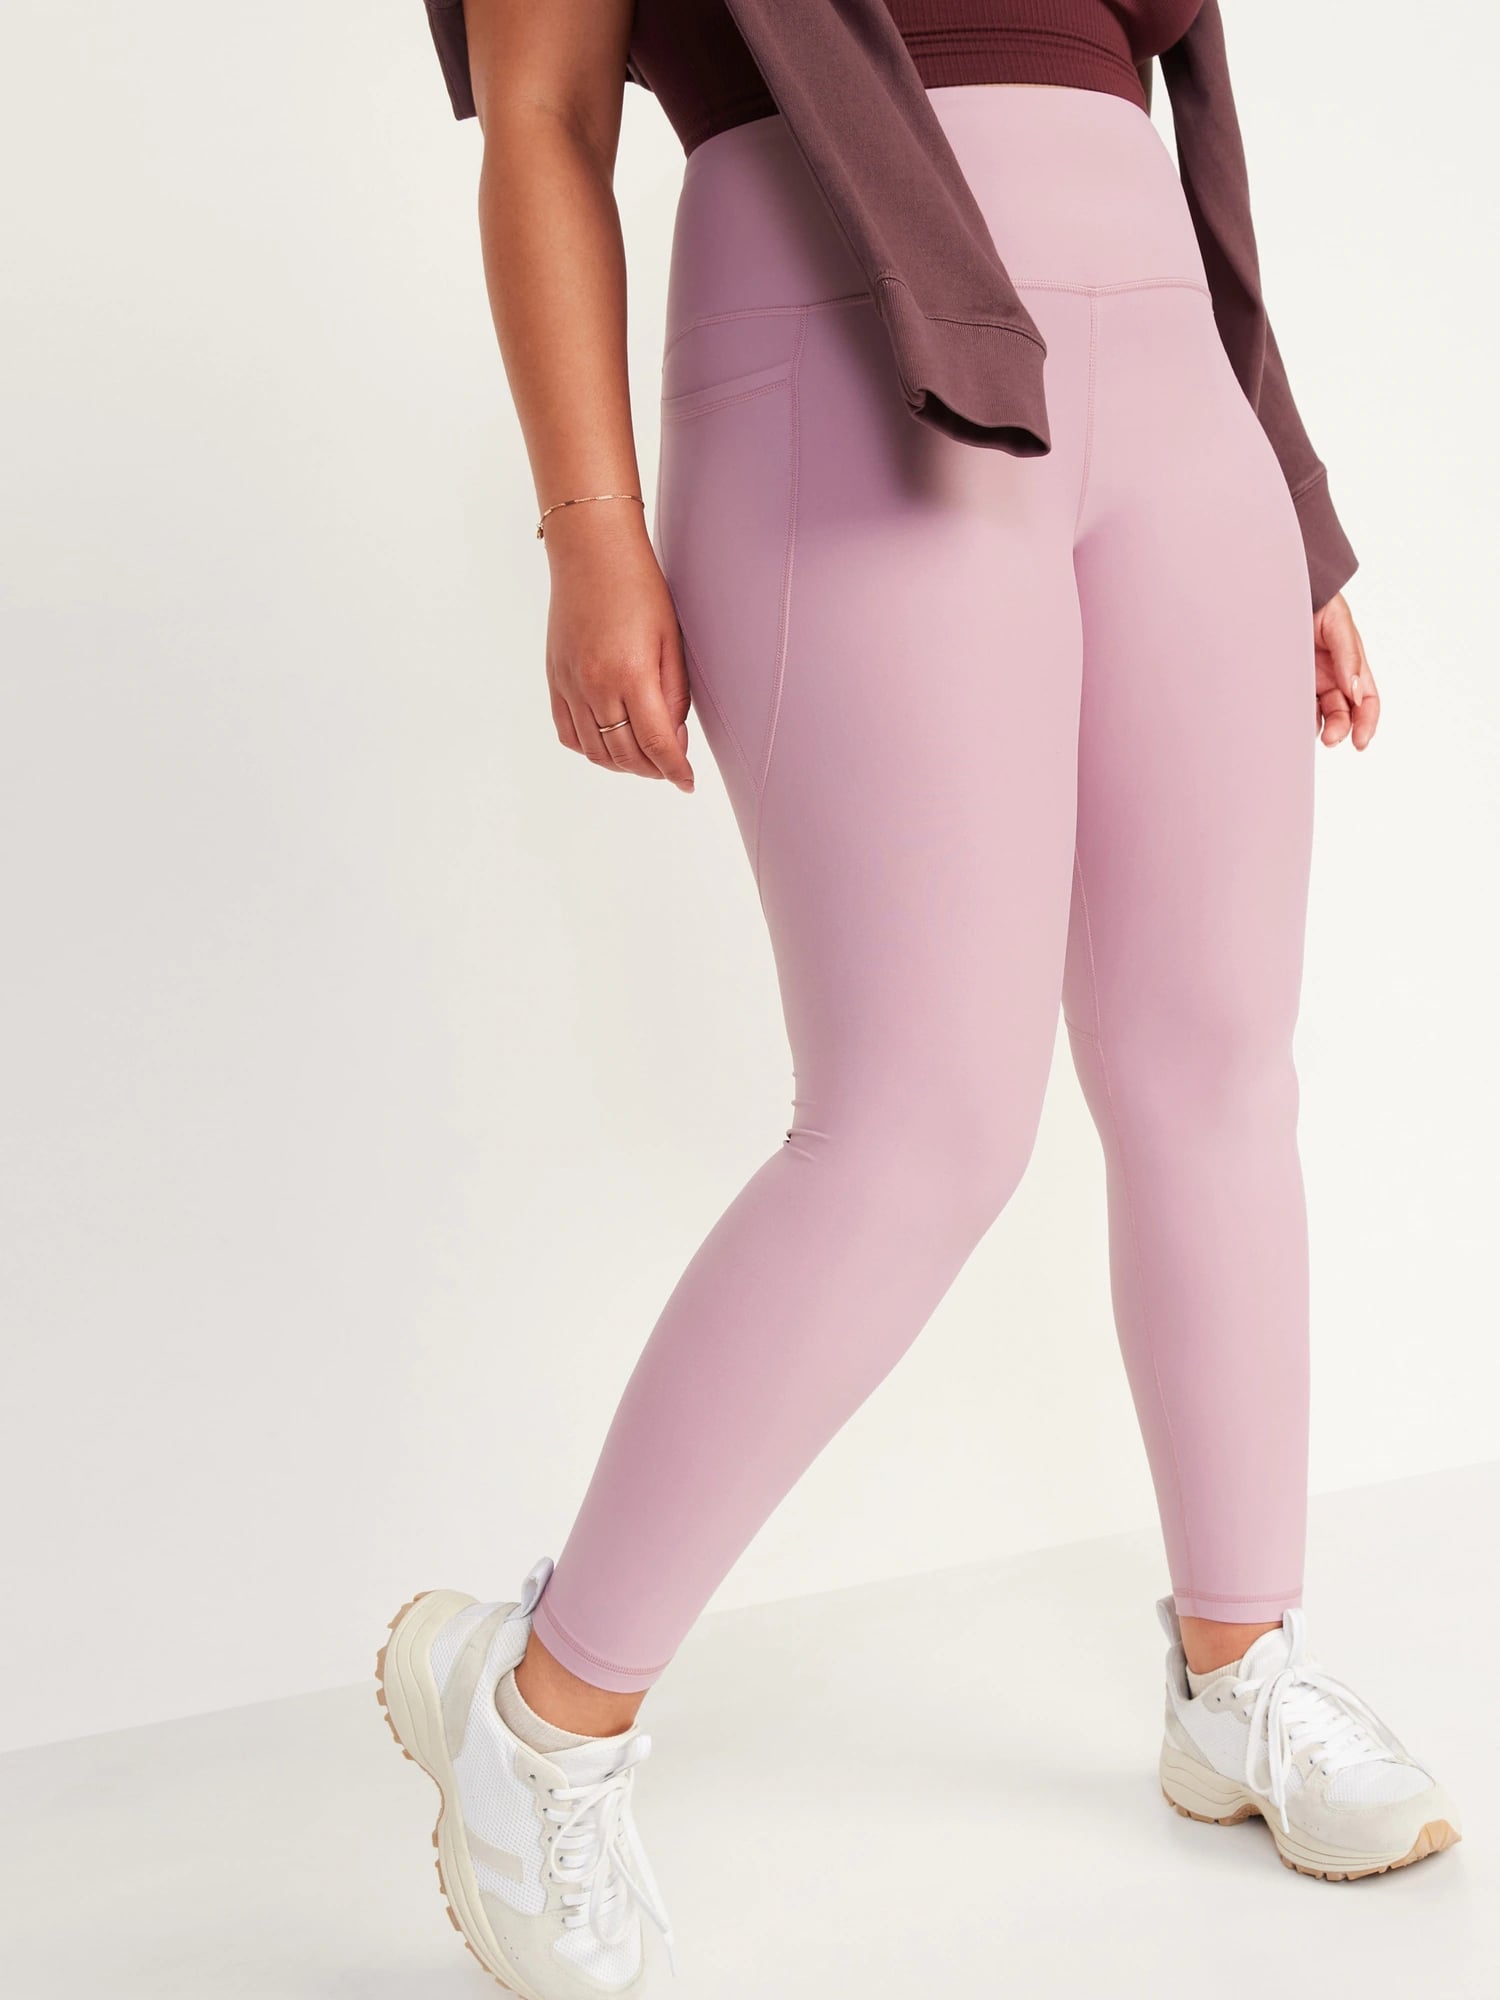 Old Navy High-Waisted PowerSoft 7/8-Length Side-Pocket Leggings, 31 Black  Friday Deals You Can Already Shop at Old Navy, From Dresses to Jeans (All  $25 or Less!)